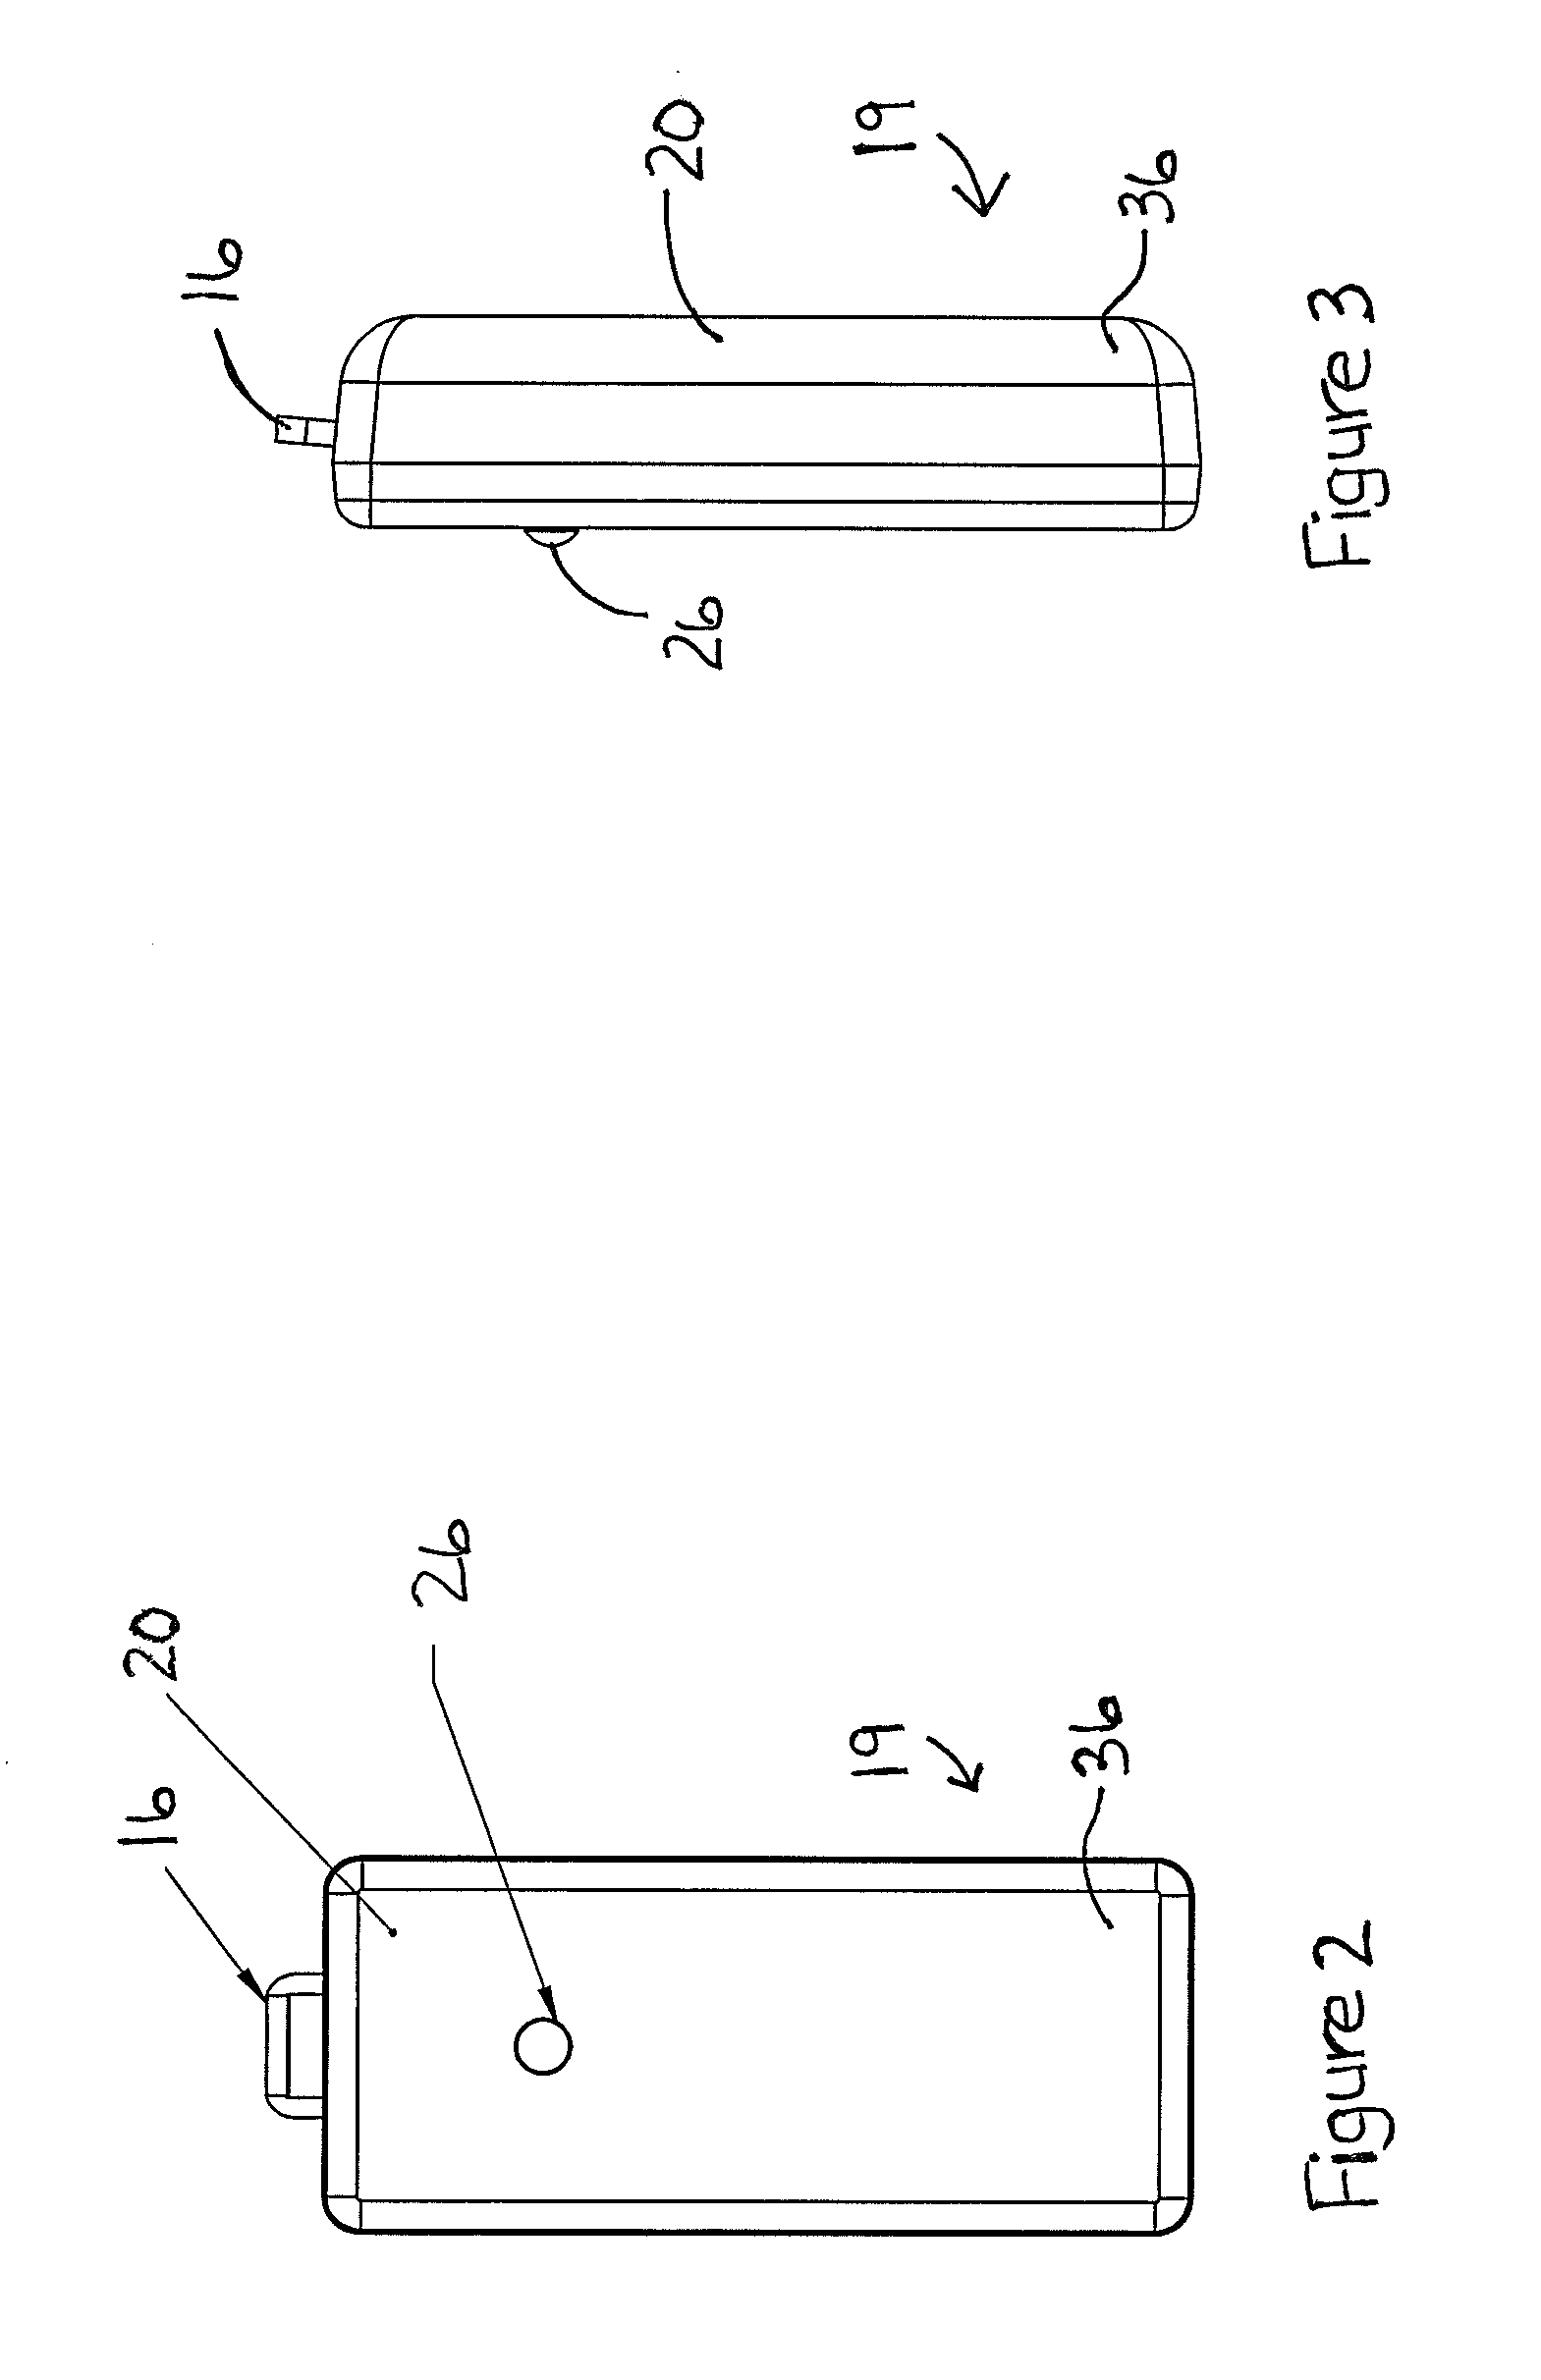 Child safety seat mobile alarm and method therefor